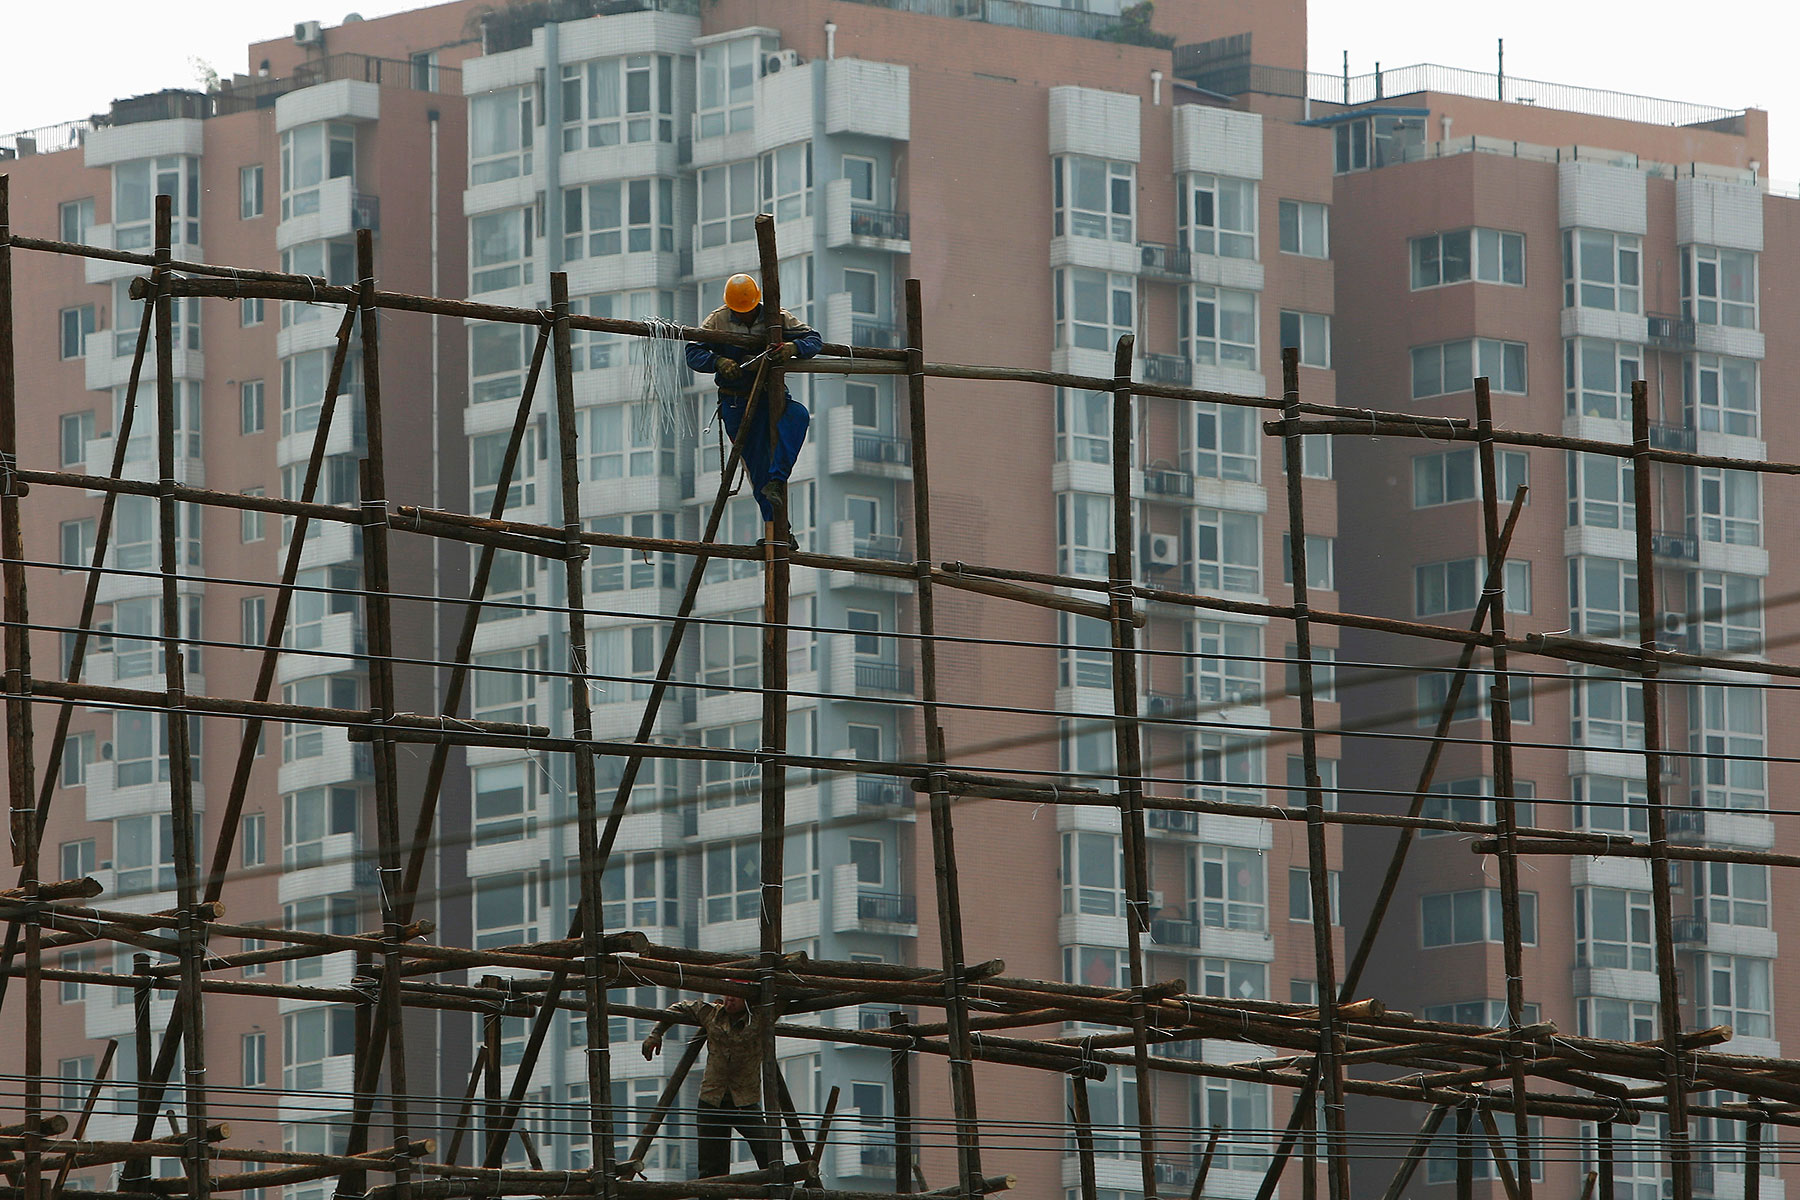 A laborer works on the scaffolding of a construction site for a new residential building in Beijing on May 8, 2014 (Kim Kyung-Hoon—Reuters)